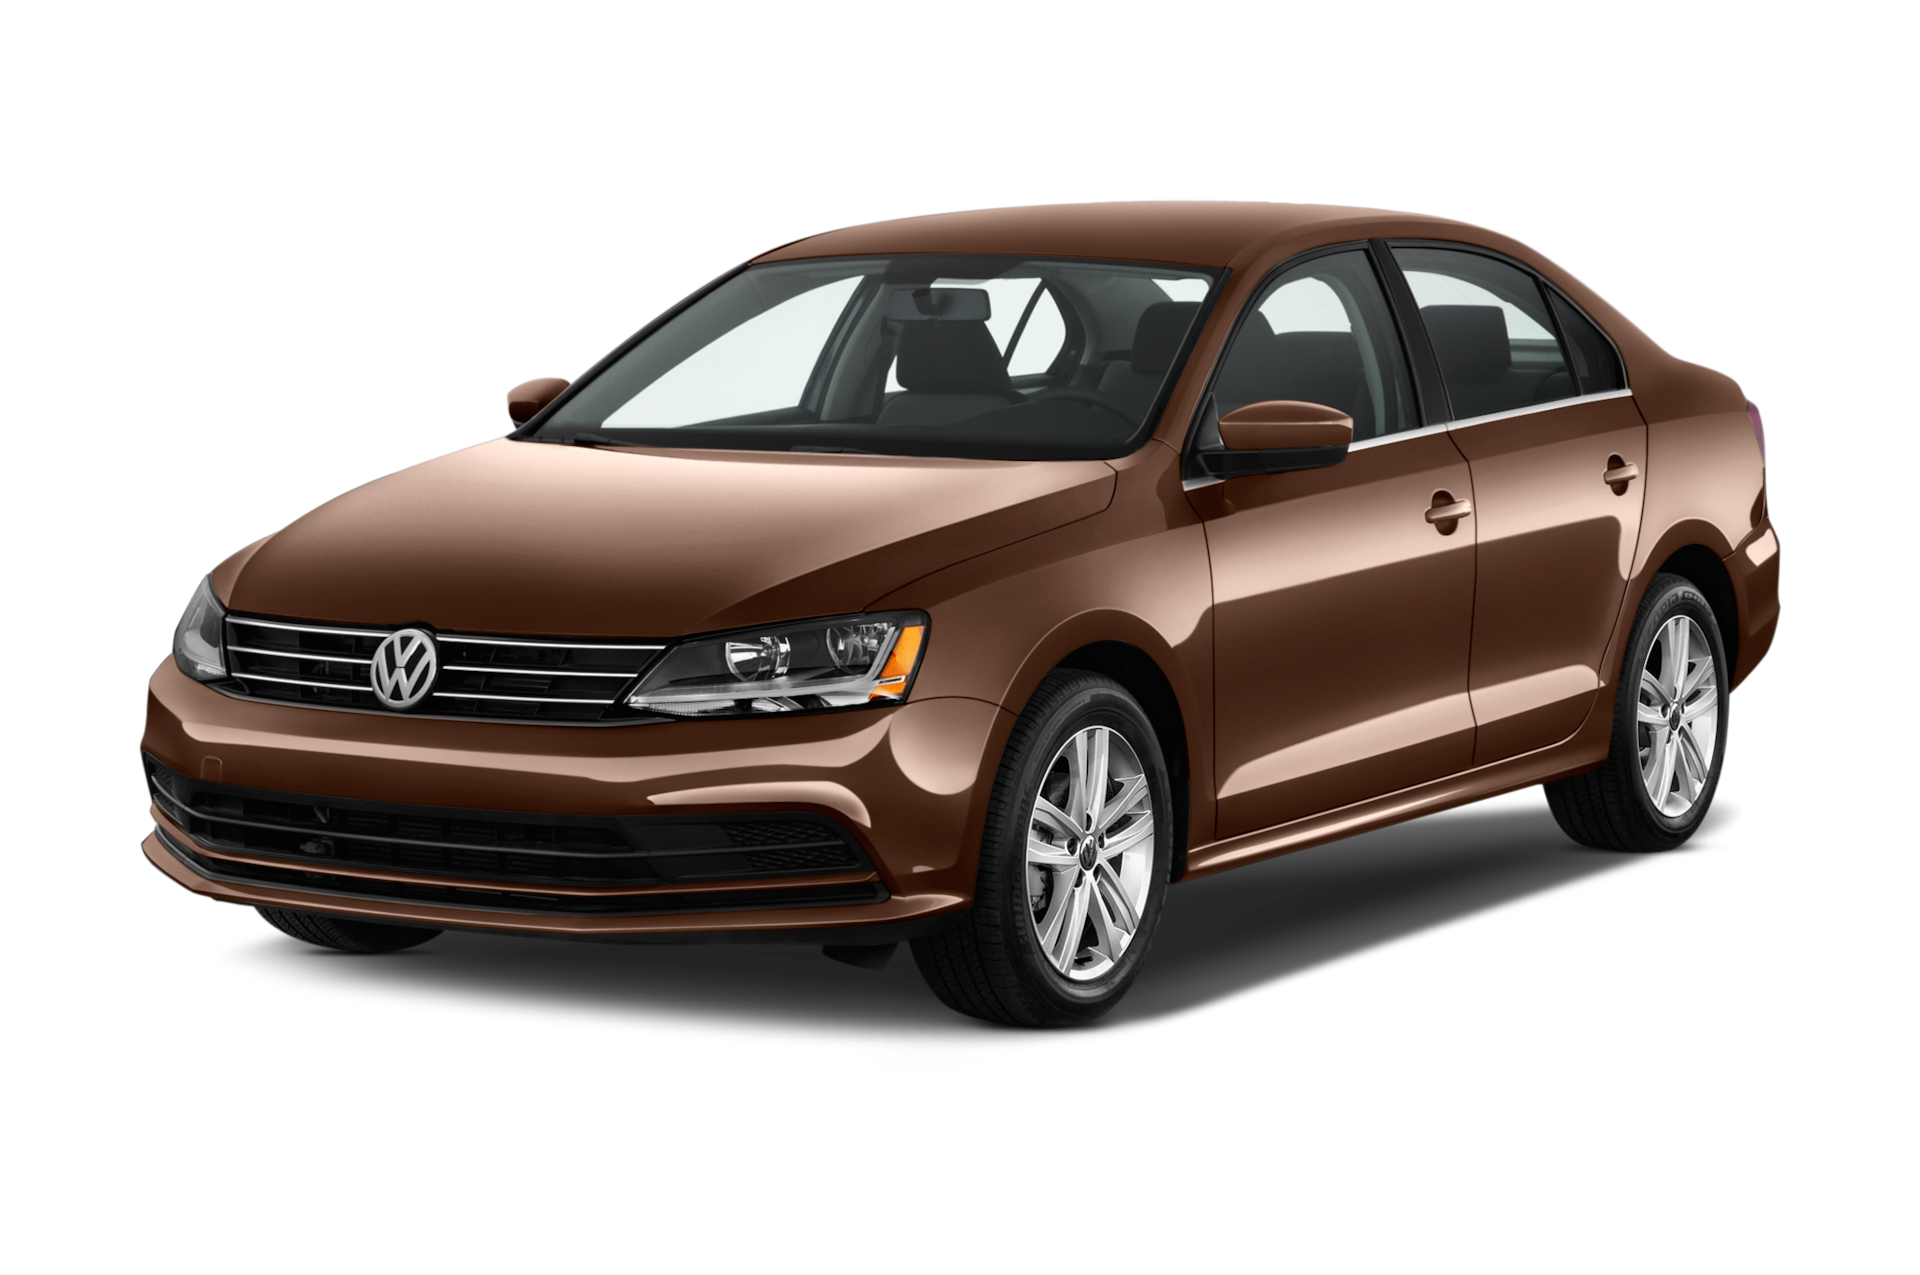 2018 Volkswagen Jetta Prices, Reviews, and Photos - MotorTrend